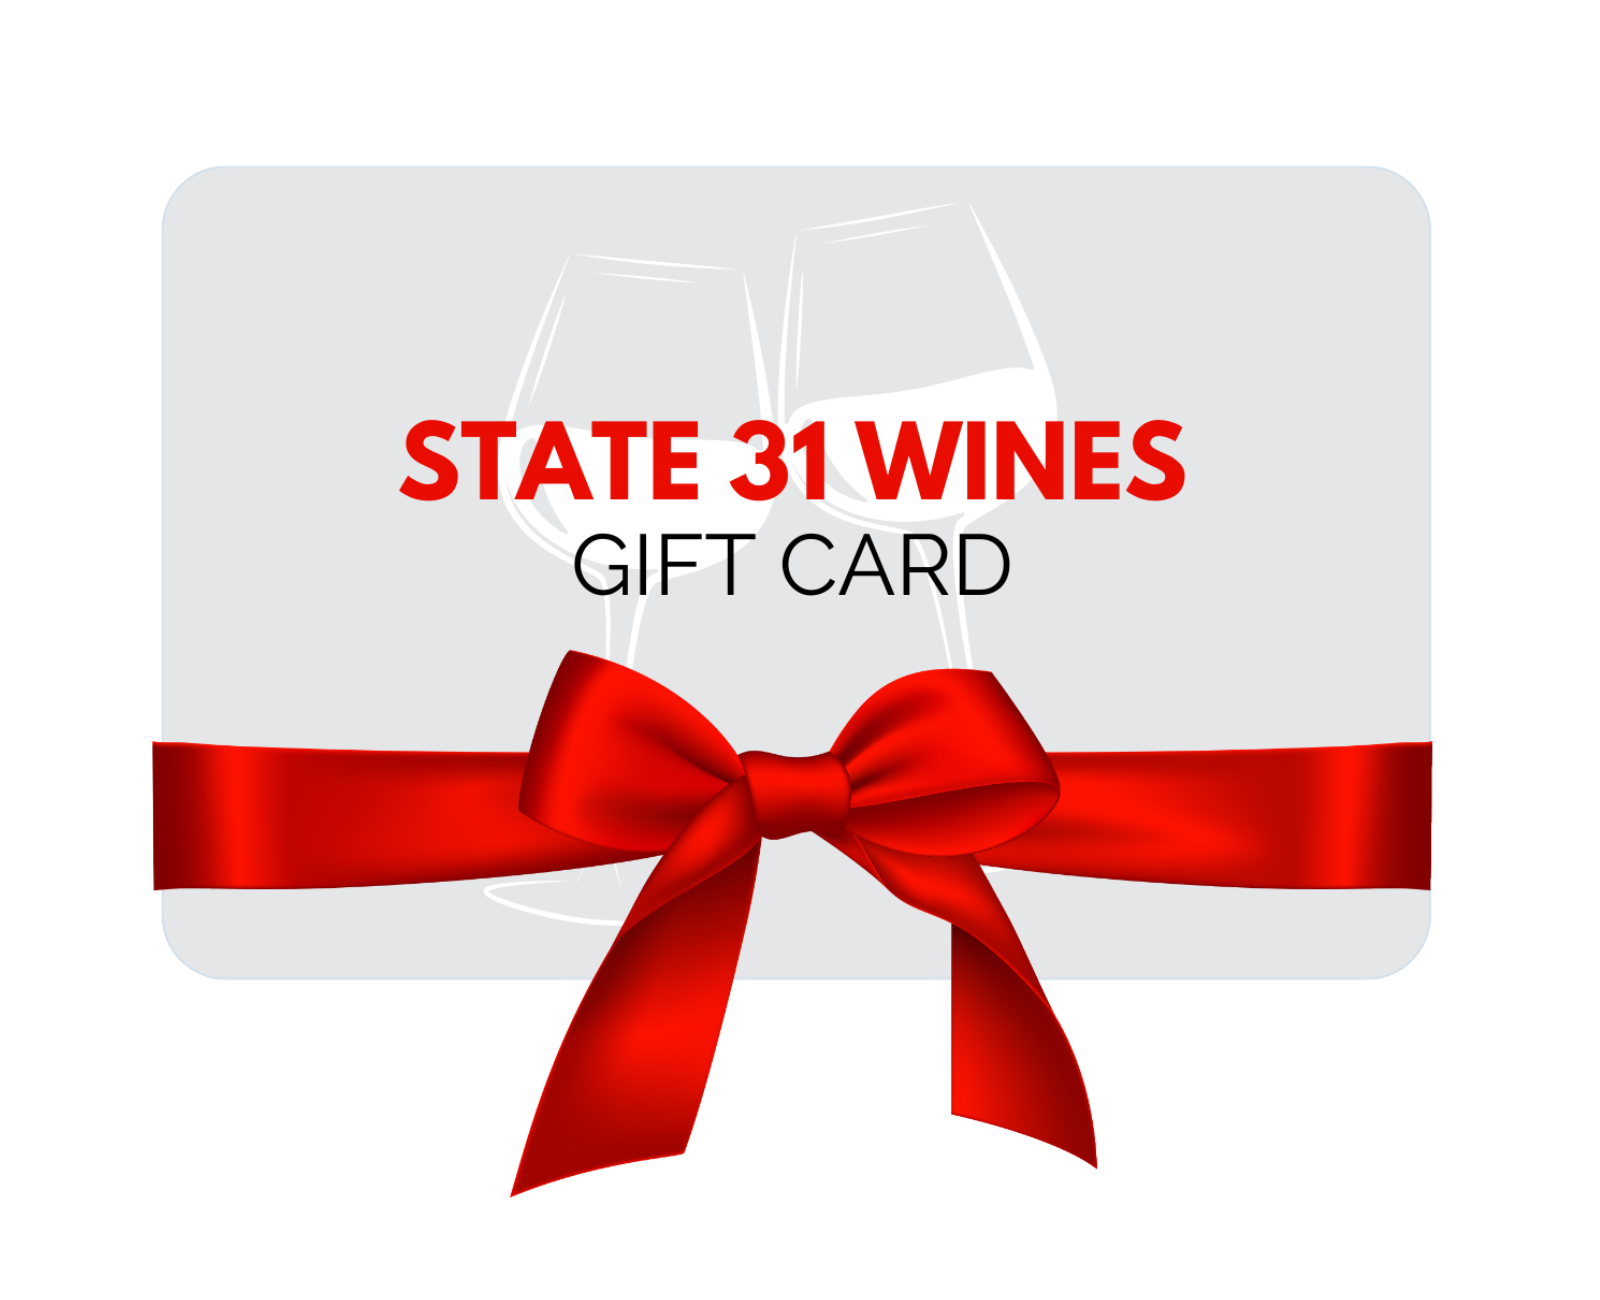 State 31 Wines Gift Card